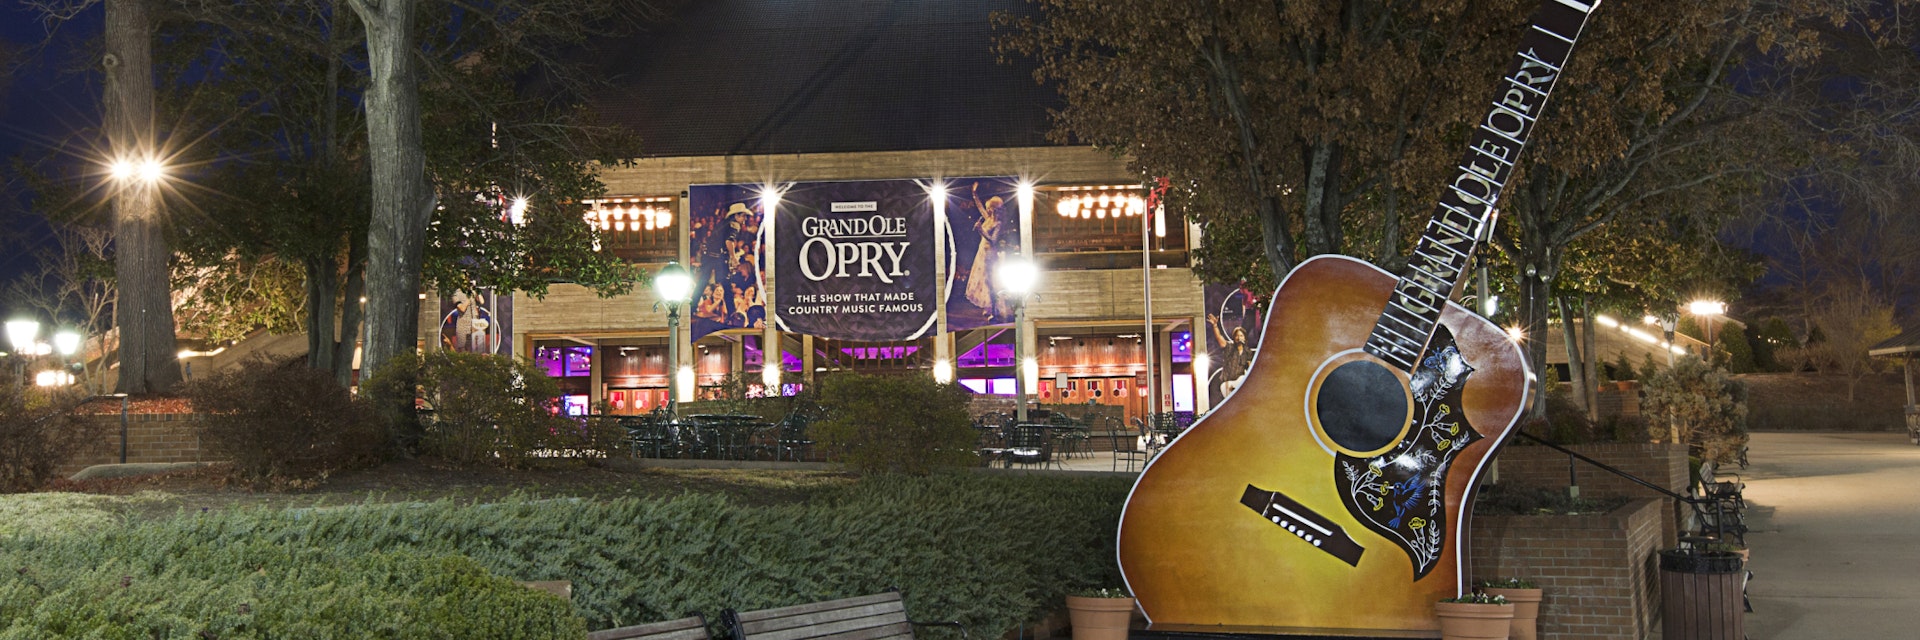 NASHVILLE, TENNESSEE-FEBRUARY 4, 2015:  The Grand Ole Opry is a landmark in Nashville, Tennessee that beckons country music fans from around the world.; Shutterstock ID 252407671; Your name (First / Last): Trisha Ping; GL account no.: 65050; Netsuite department name: Online Editoria; Full Product or Project name including edition: 65050/Online Editorial/Trisha Ping/Nashville